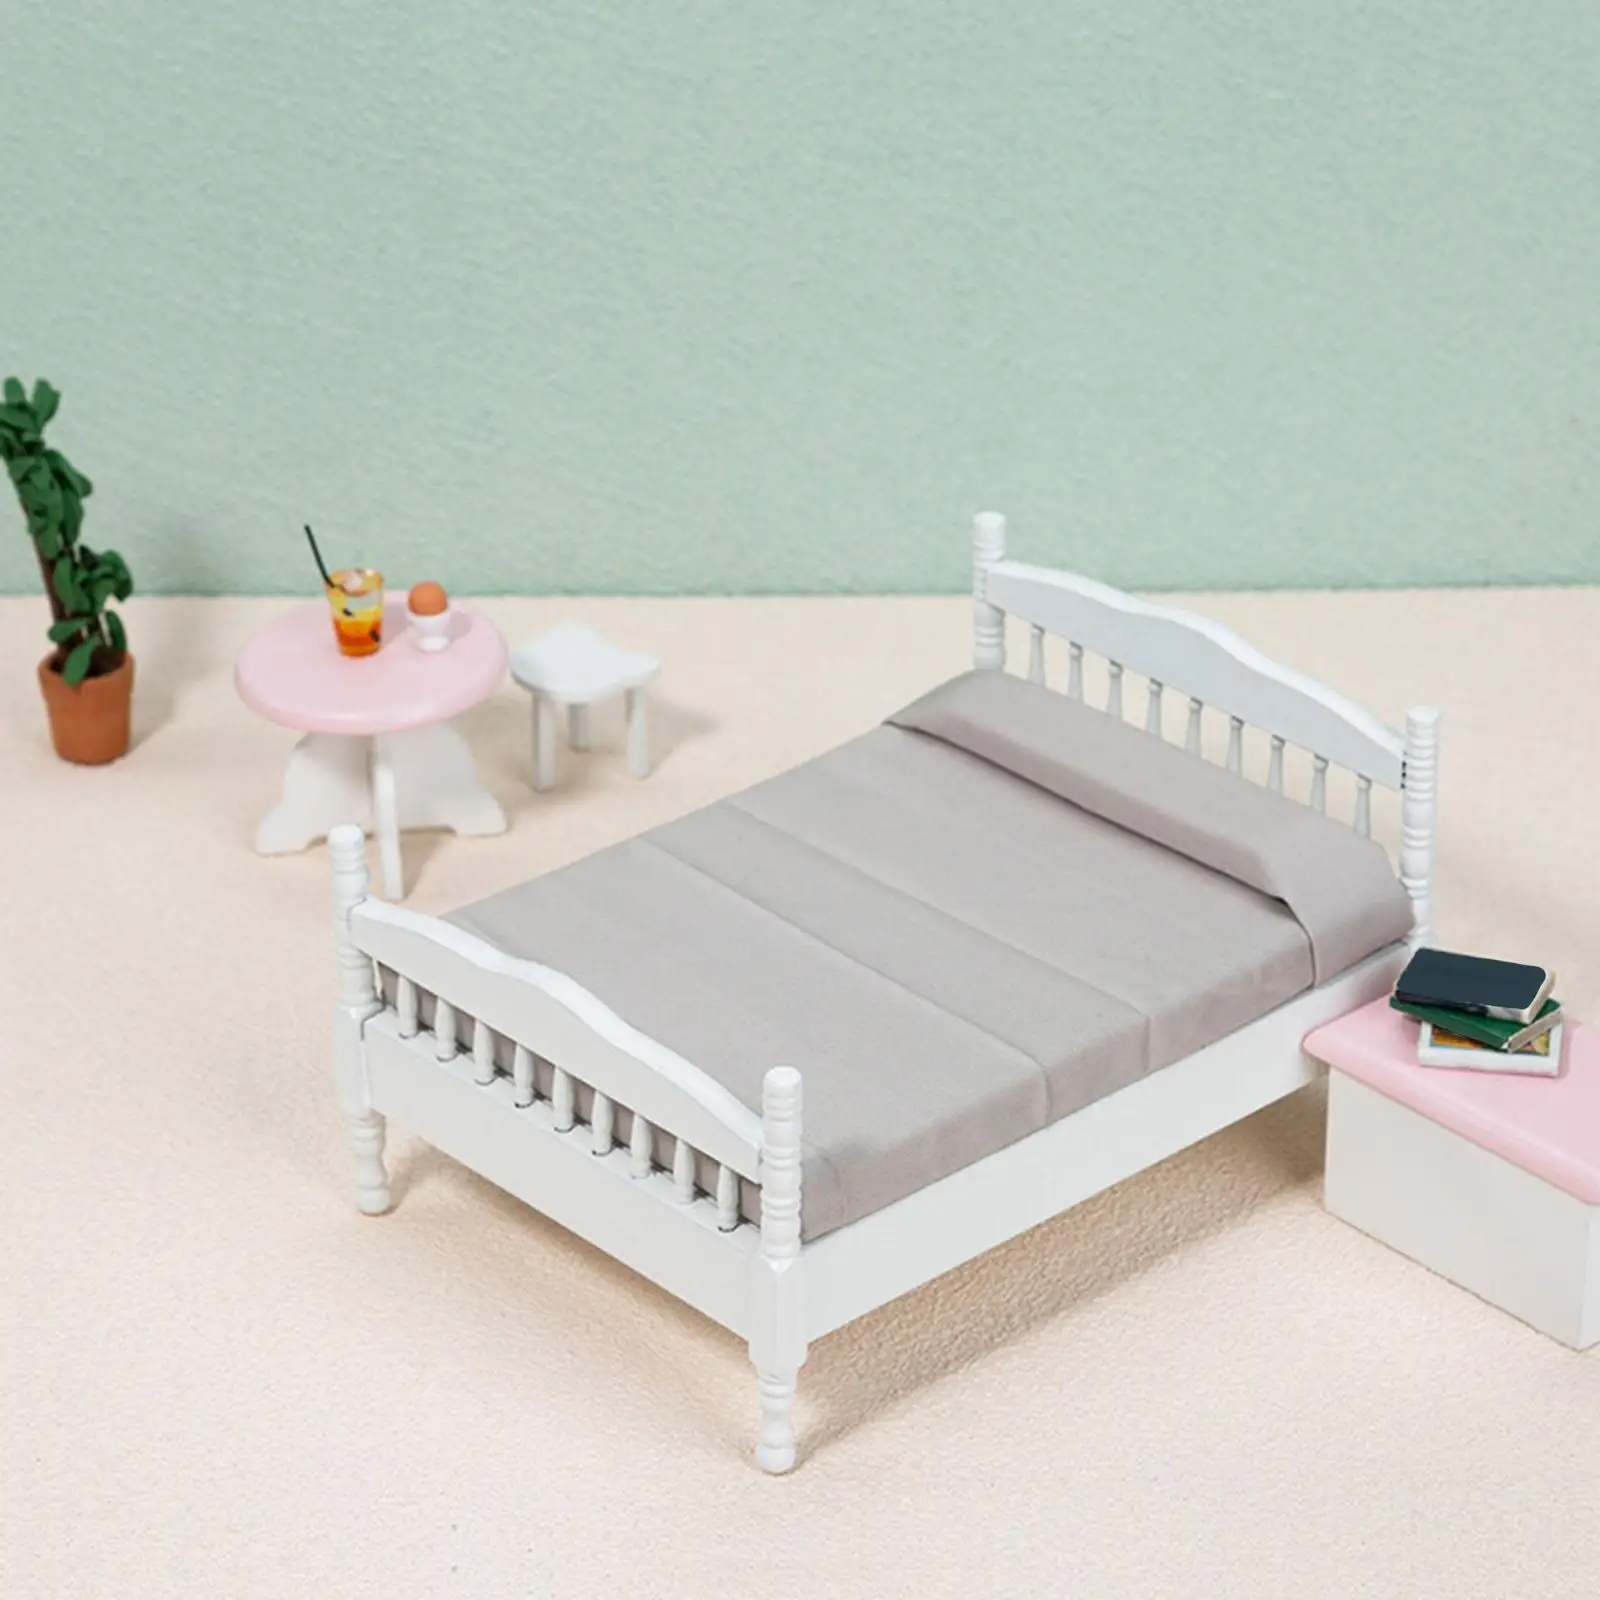 Dolls House Miniature 1/12th Scale Children's Bedroom Set Blue or Pink 